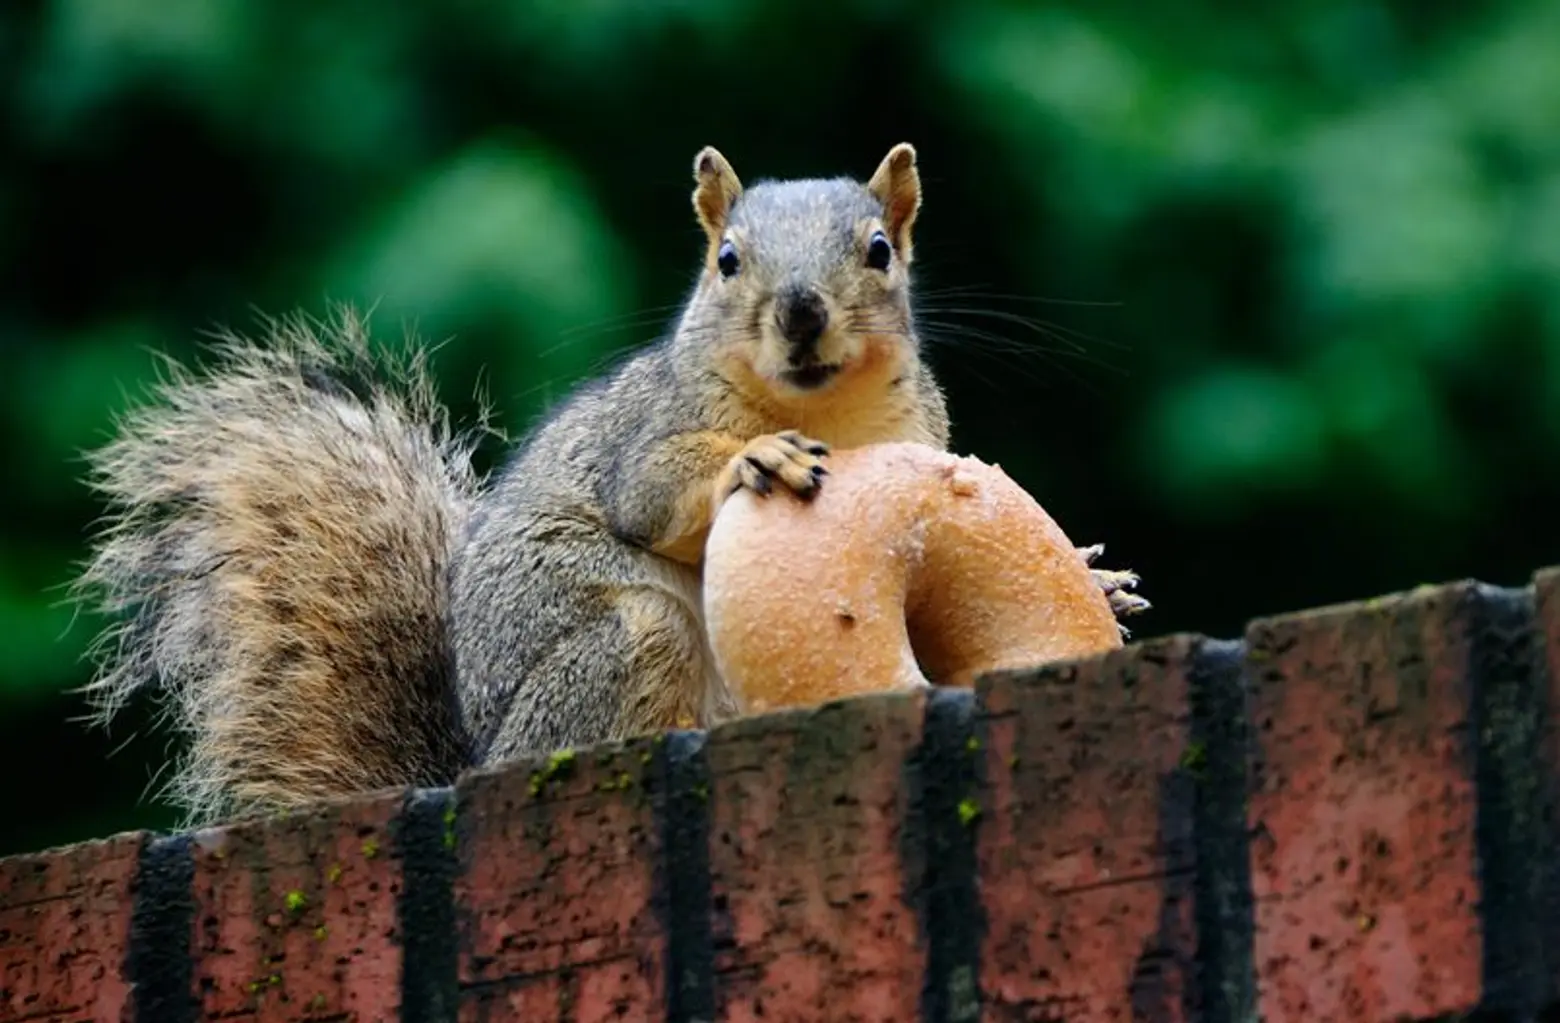 Amid fears of Russian hackers, expert warns of threat from squirrel cyberattack